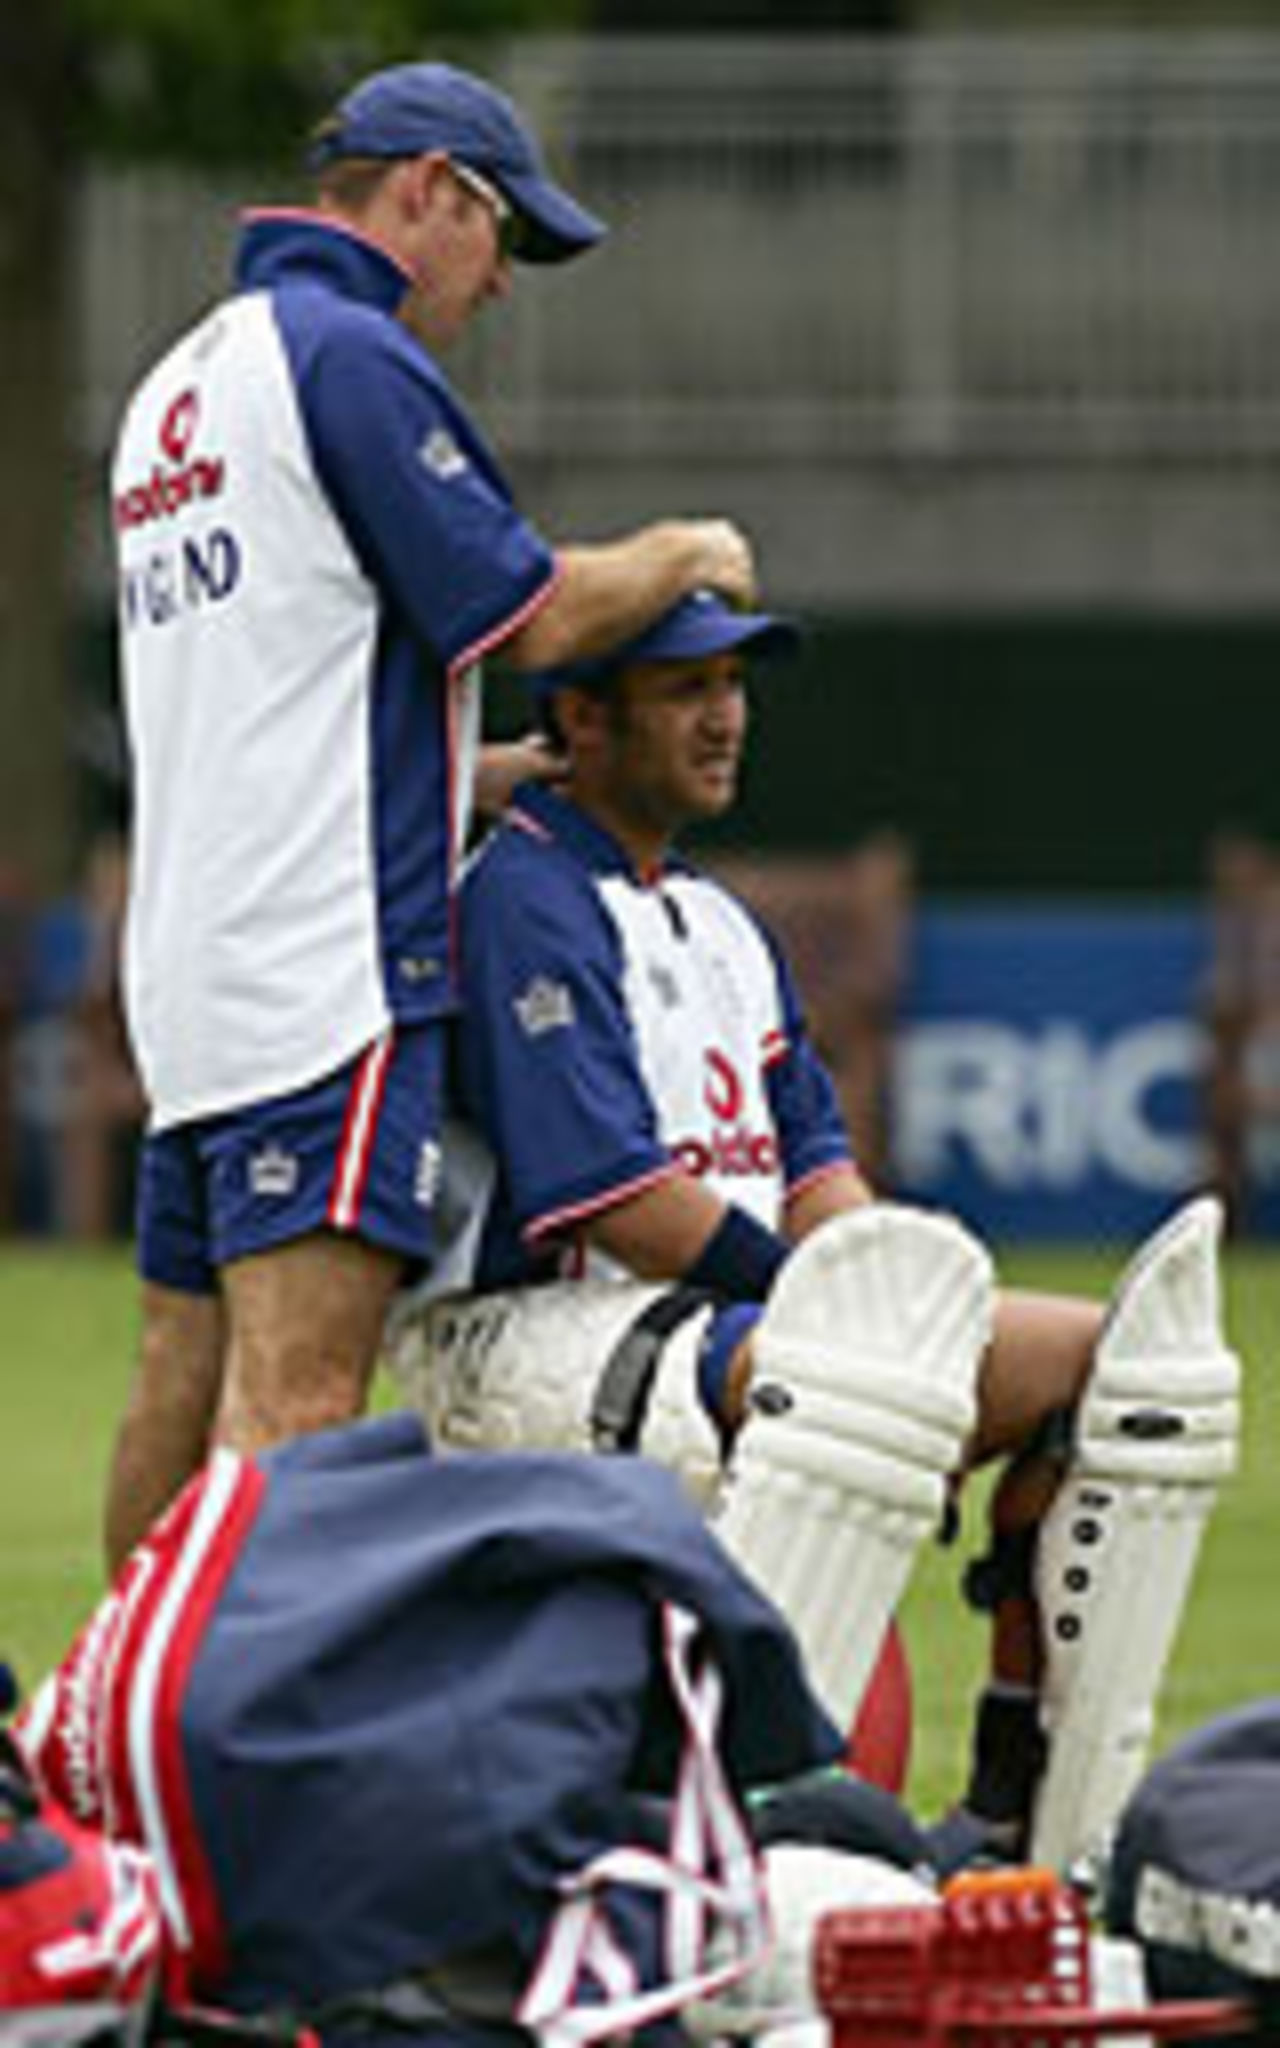 Mark Butcher feels the pain after his car crash, Lord's, July 20, 2004